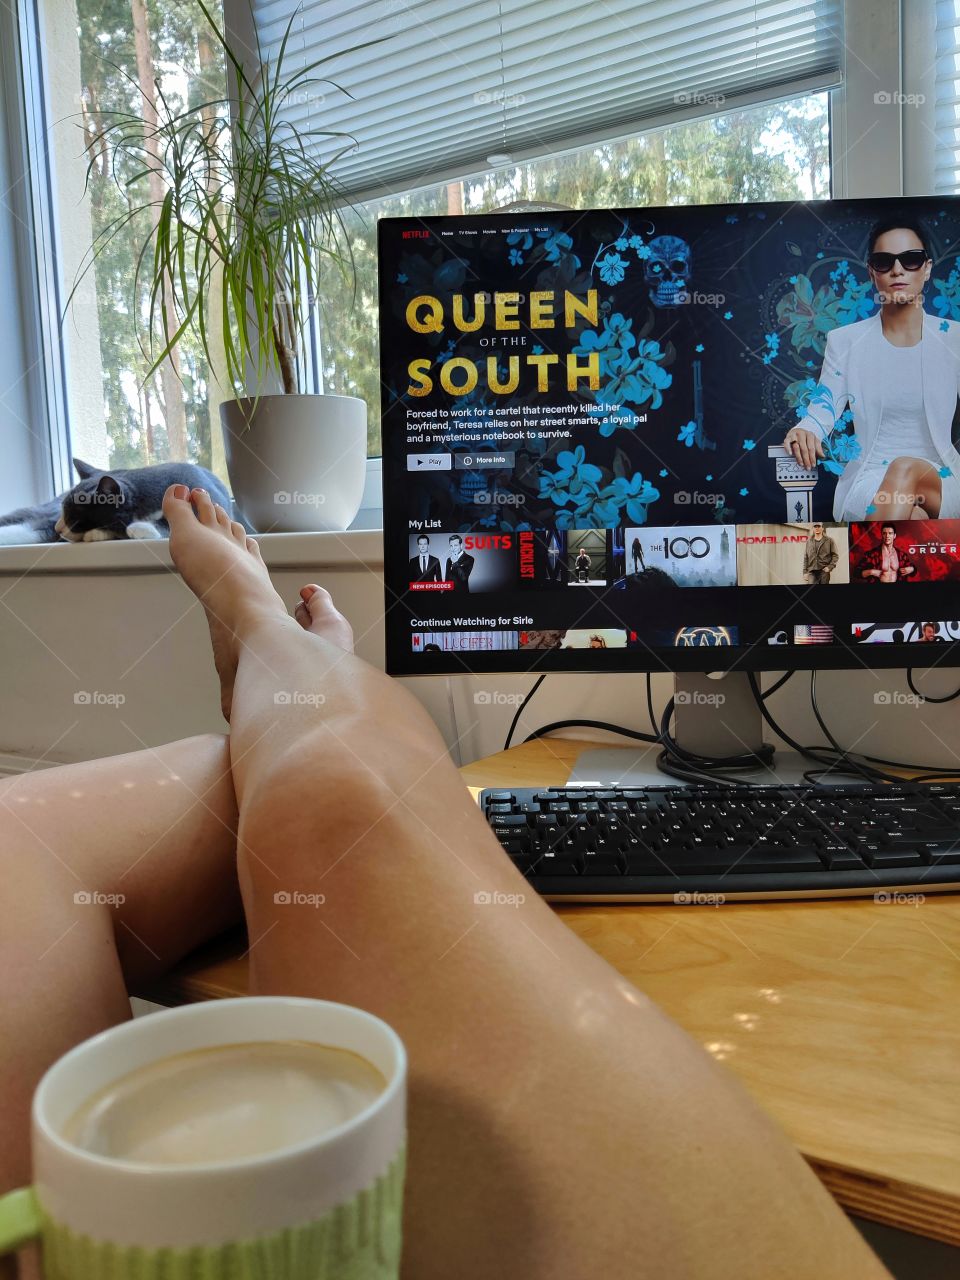 Find the most comfortable position, grab a cup of hot coffee and hit play on your favorite show